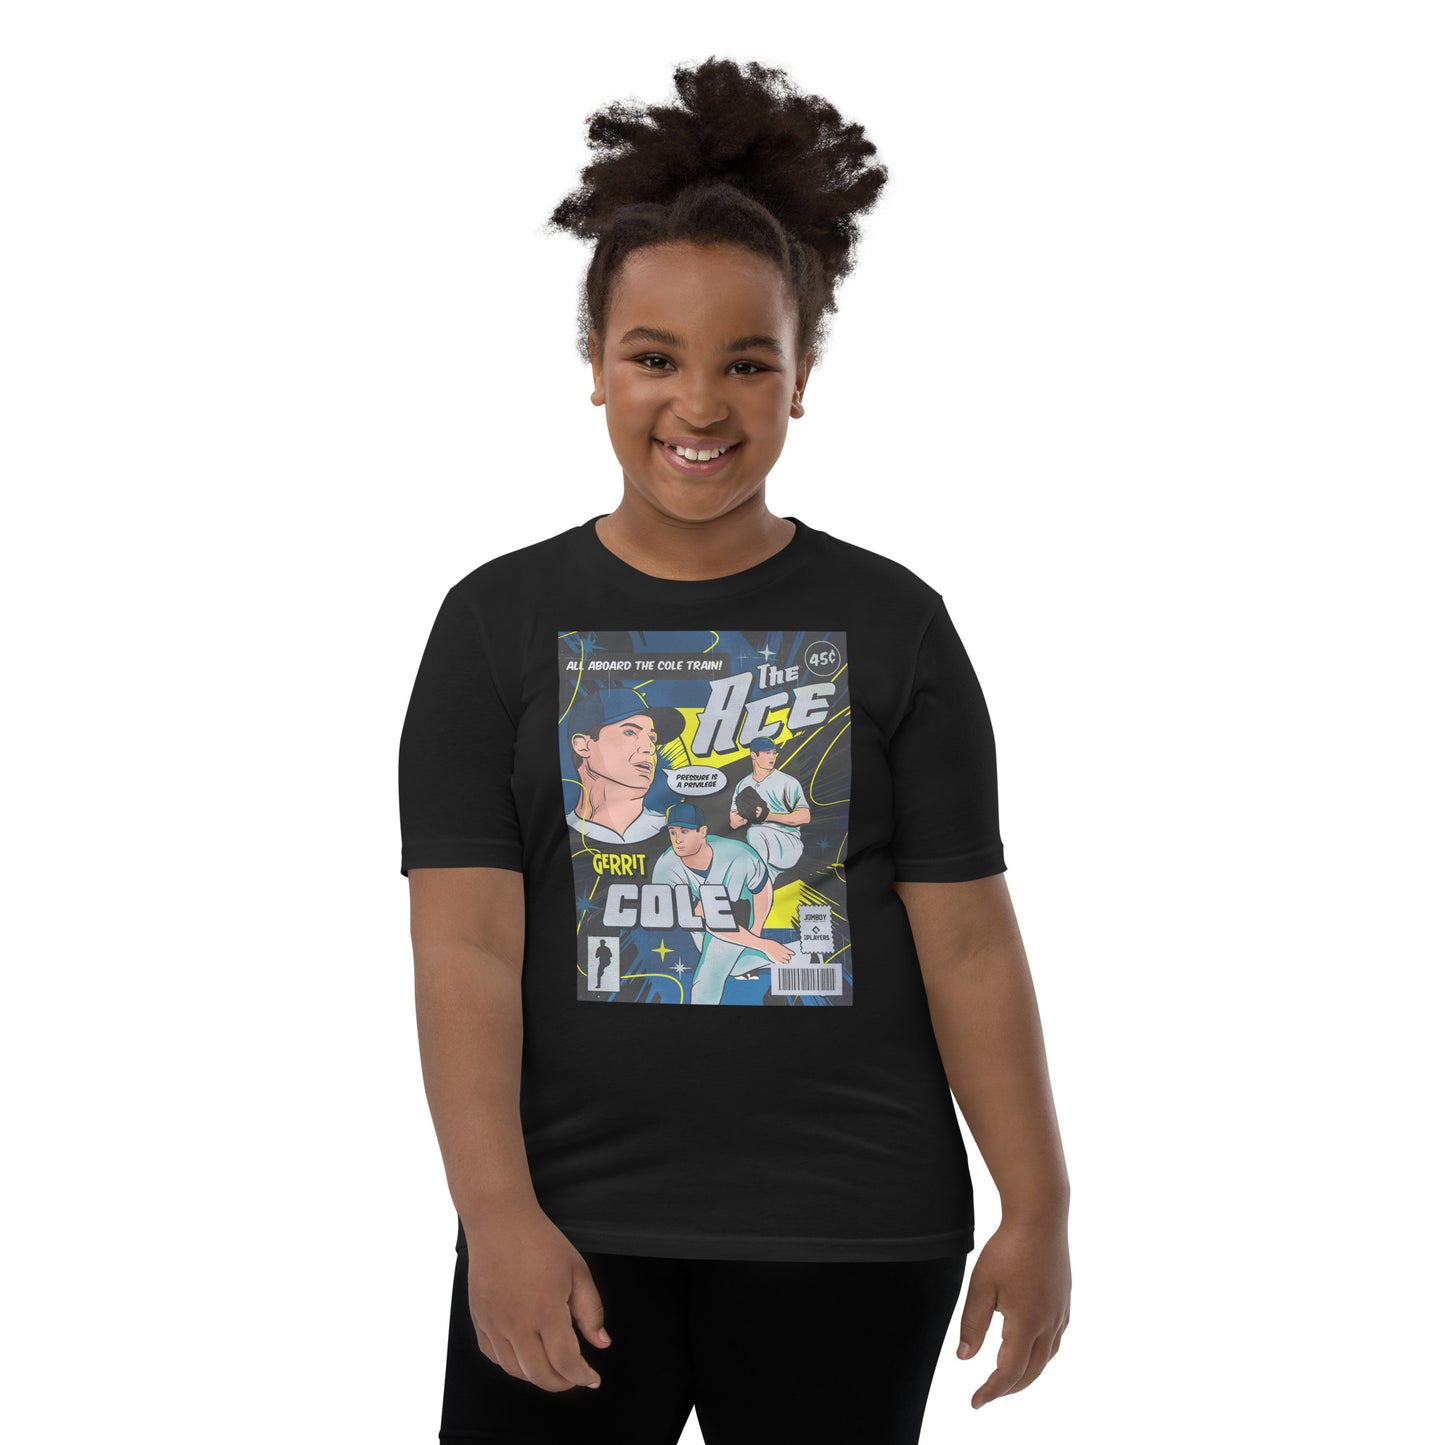 Gerrit Cole "The Ace" Comic Edition | Youth T-Shirt